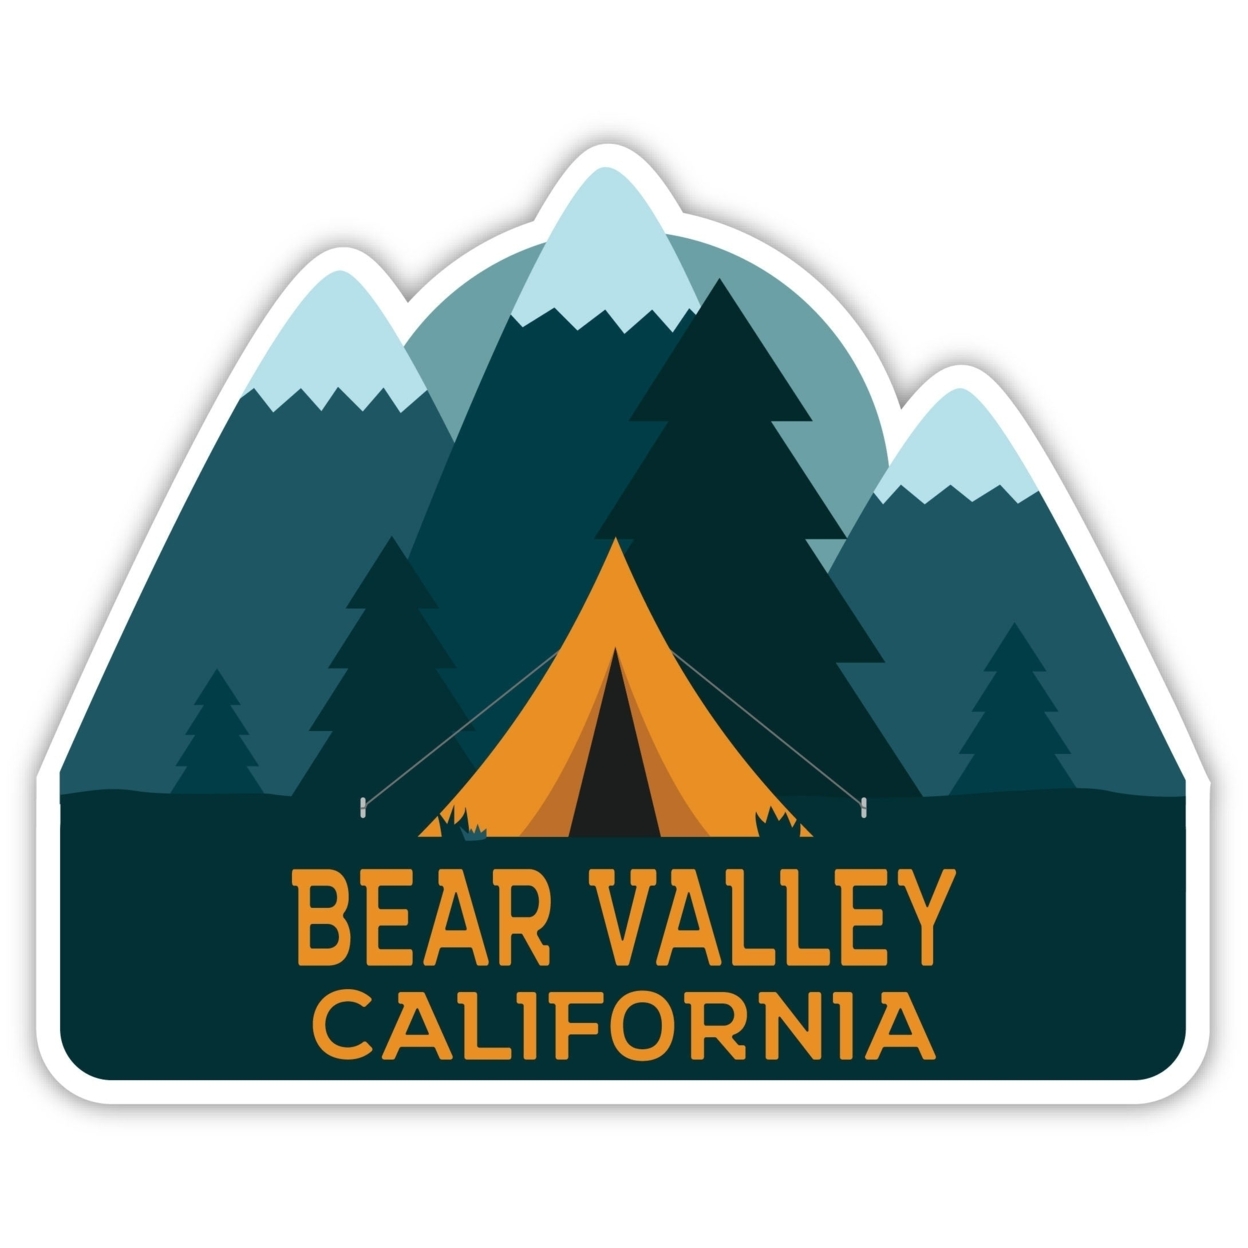 Bear Valley California Souvenir Decorative Stickers (Choose Theme And Size) - Single Unit, 6-Inch, Tent